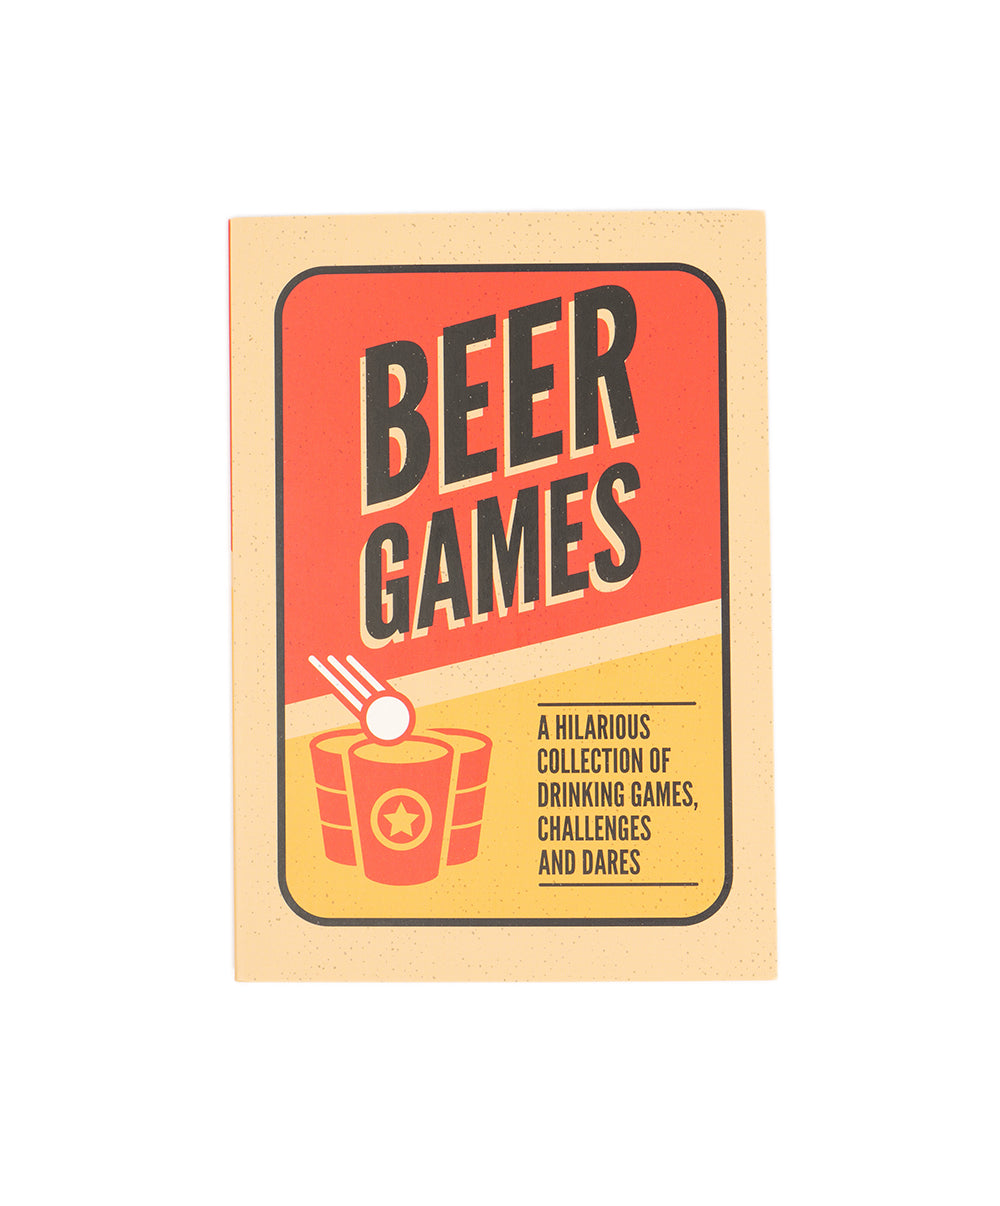 FIFTY BEER GAMES